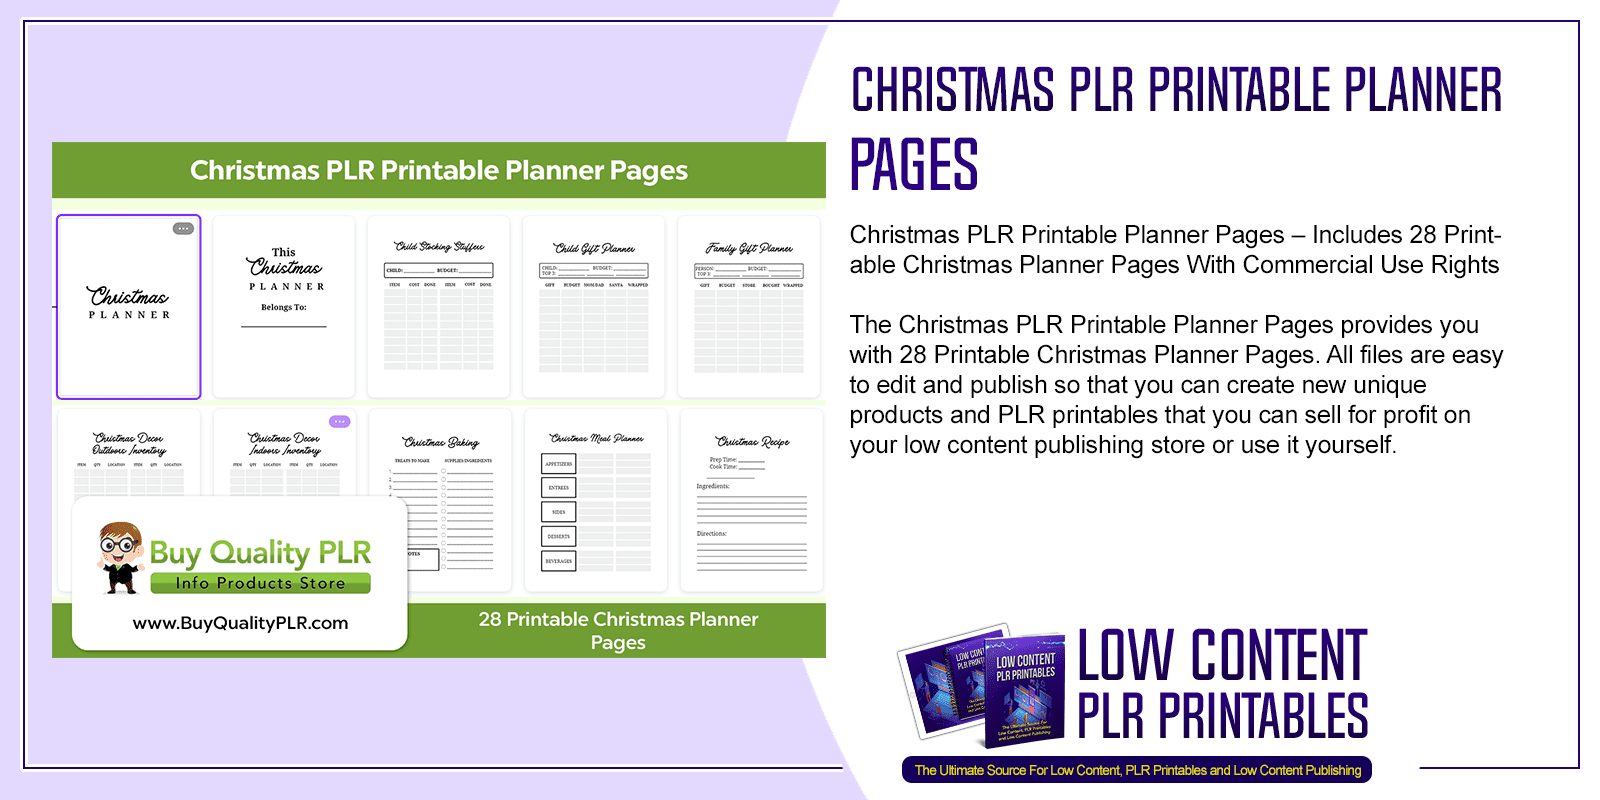 Christmas PLR Printable Planner Pages